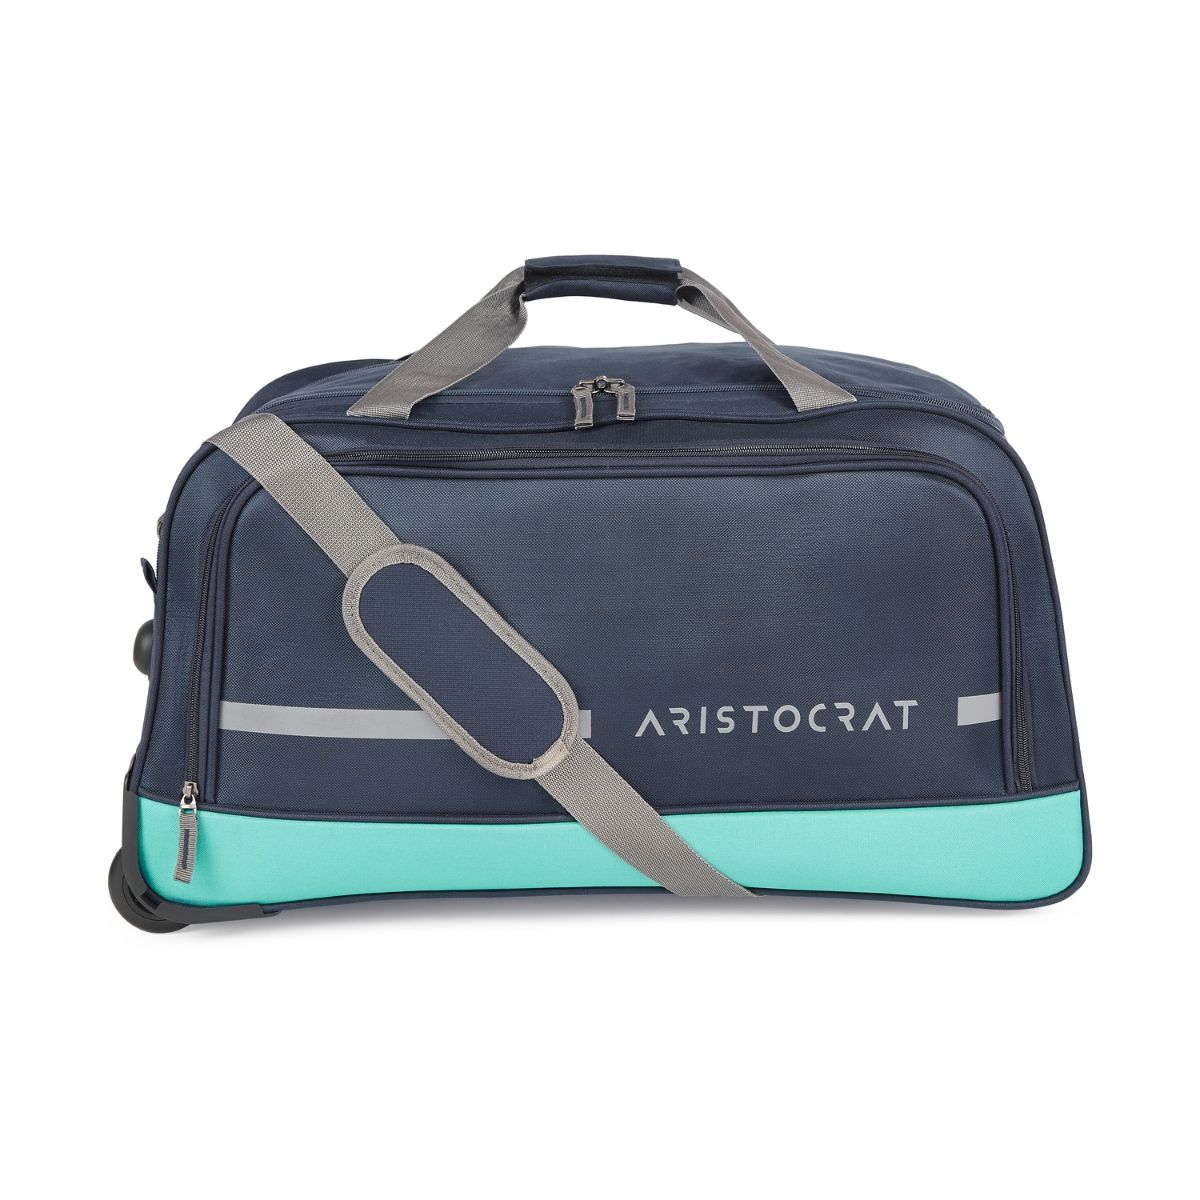 Blue ARISTOCRAT BACKPACK, Number Of Compartments: 3, Bag Capacity: 38LITRES